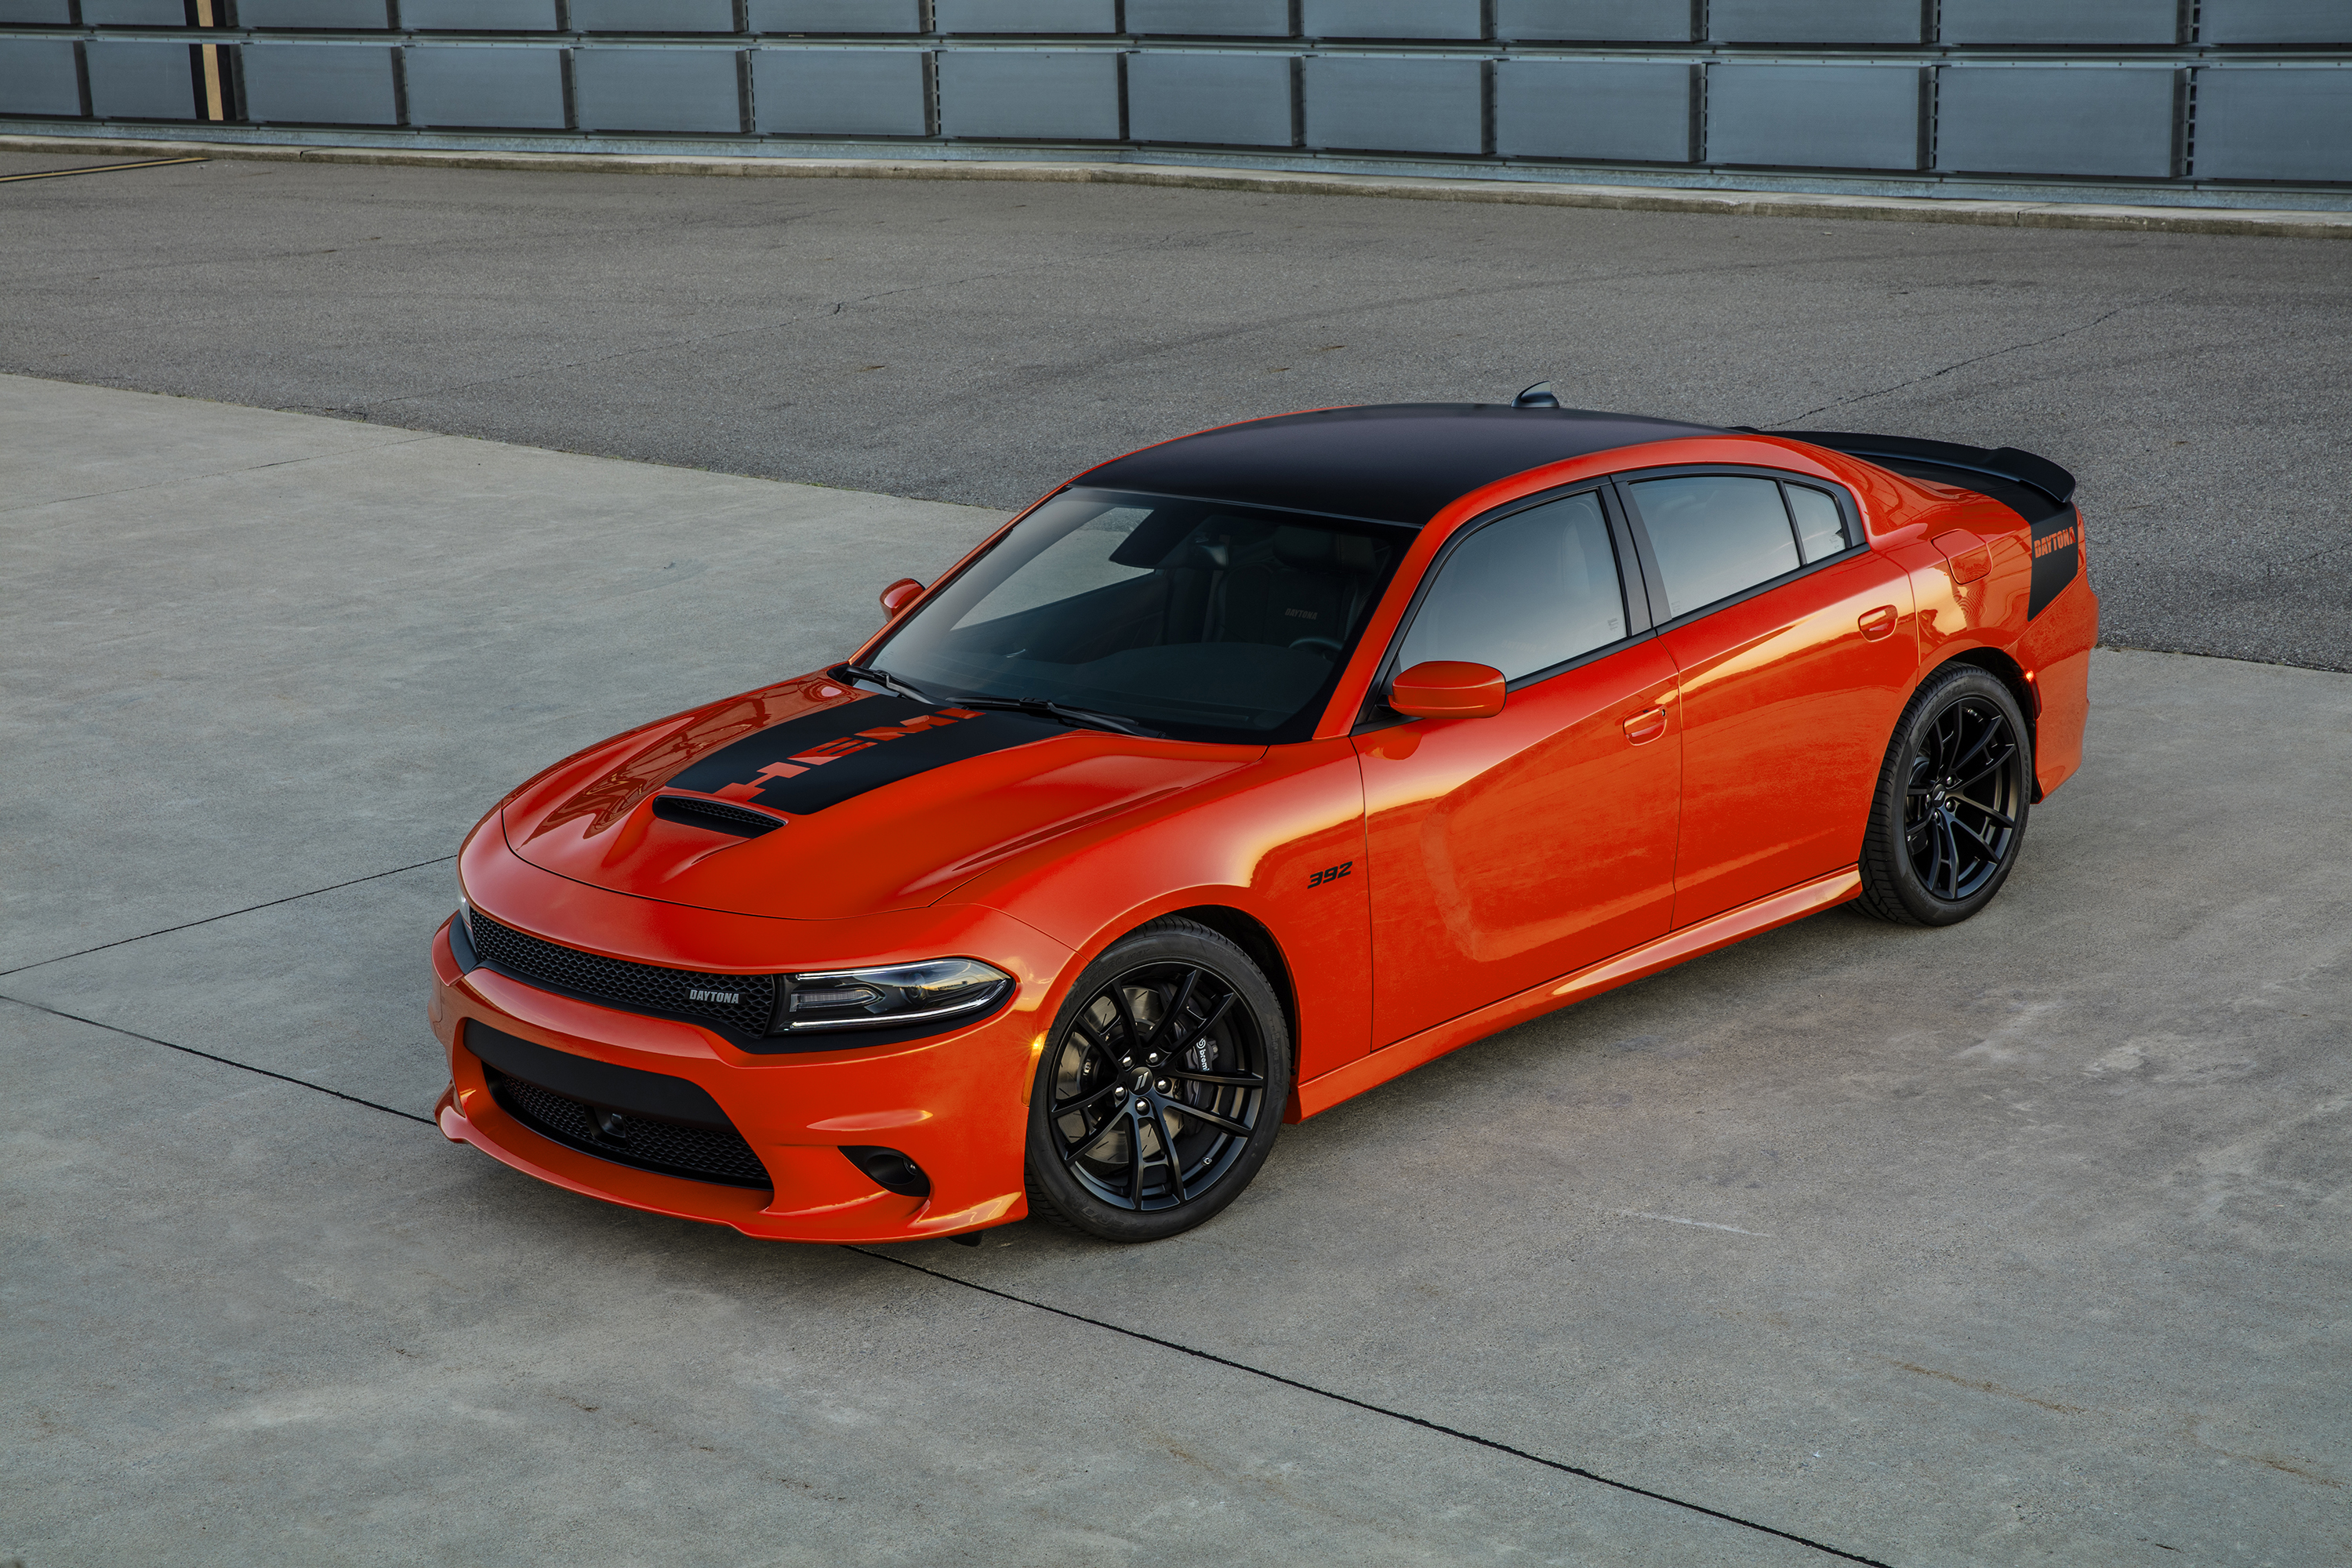 Car Dodge Dodge Charger Dodge Charger Daytona Muscle Car Red Car Vehicle 3000x2000